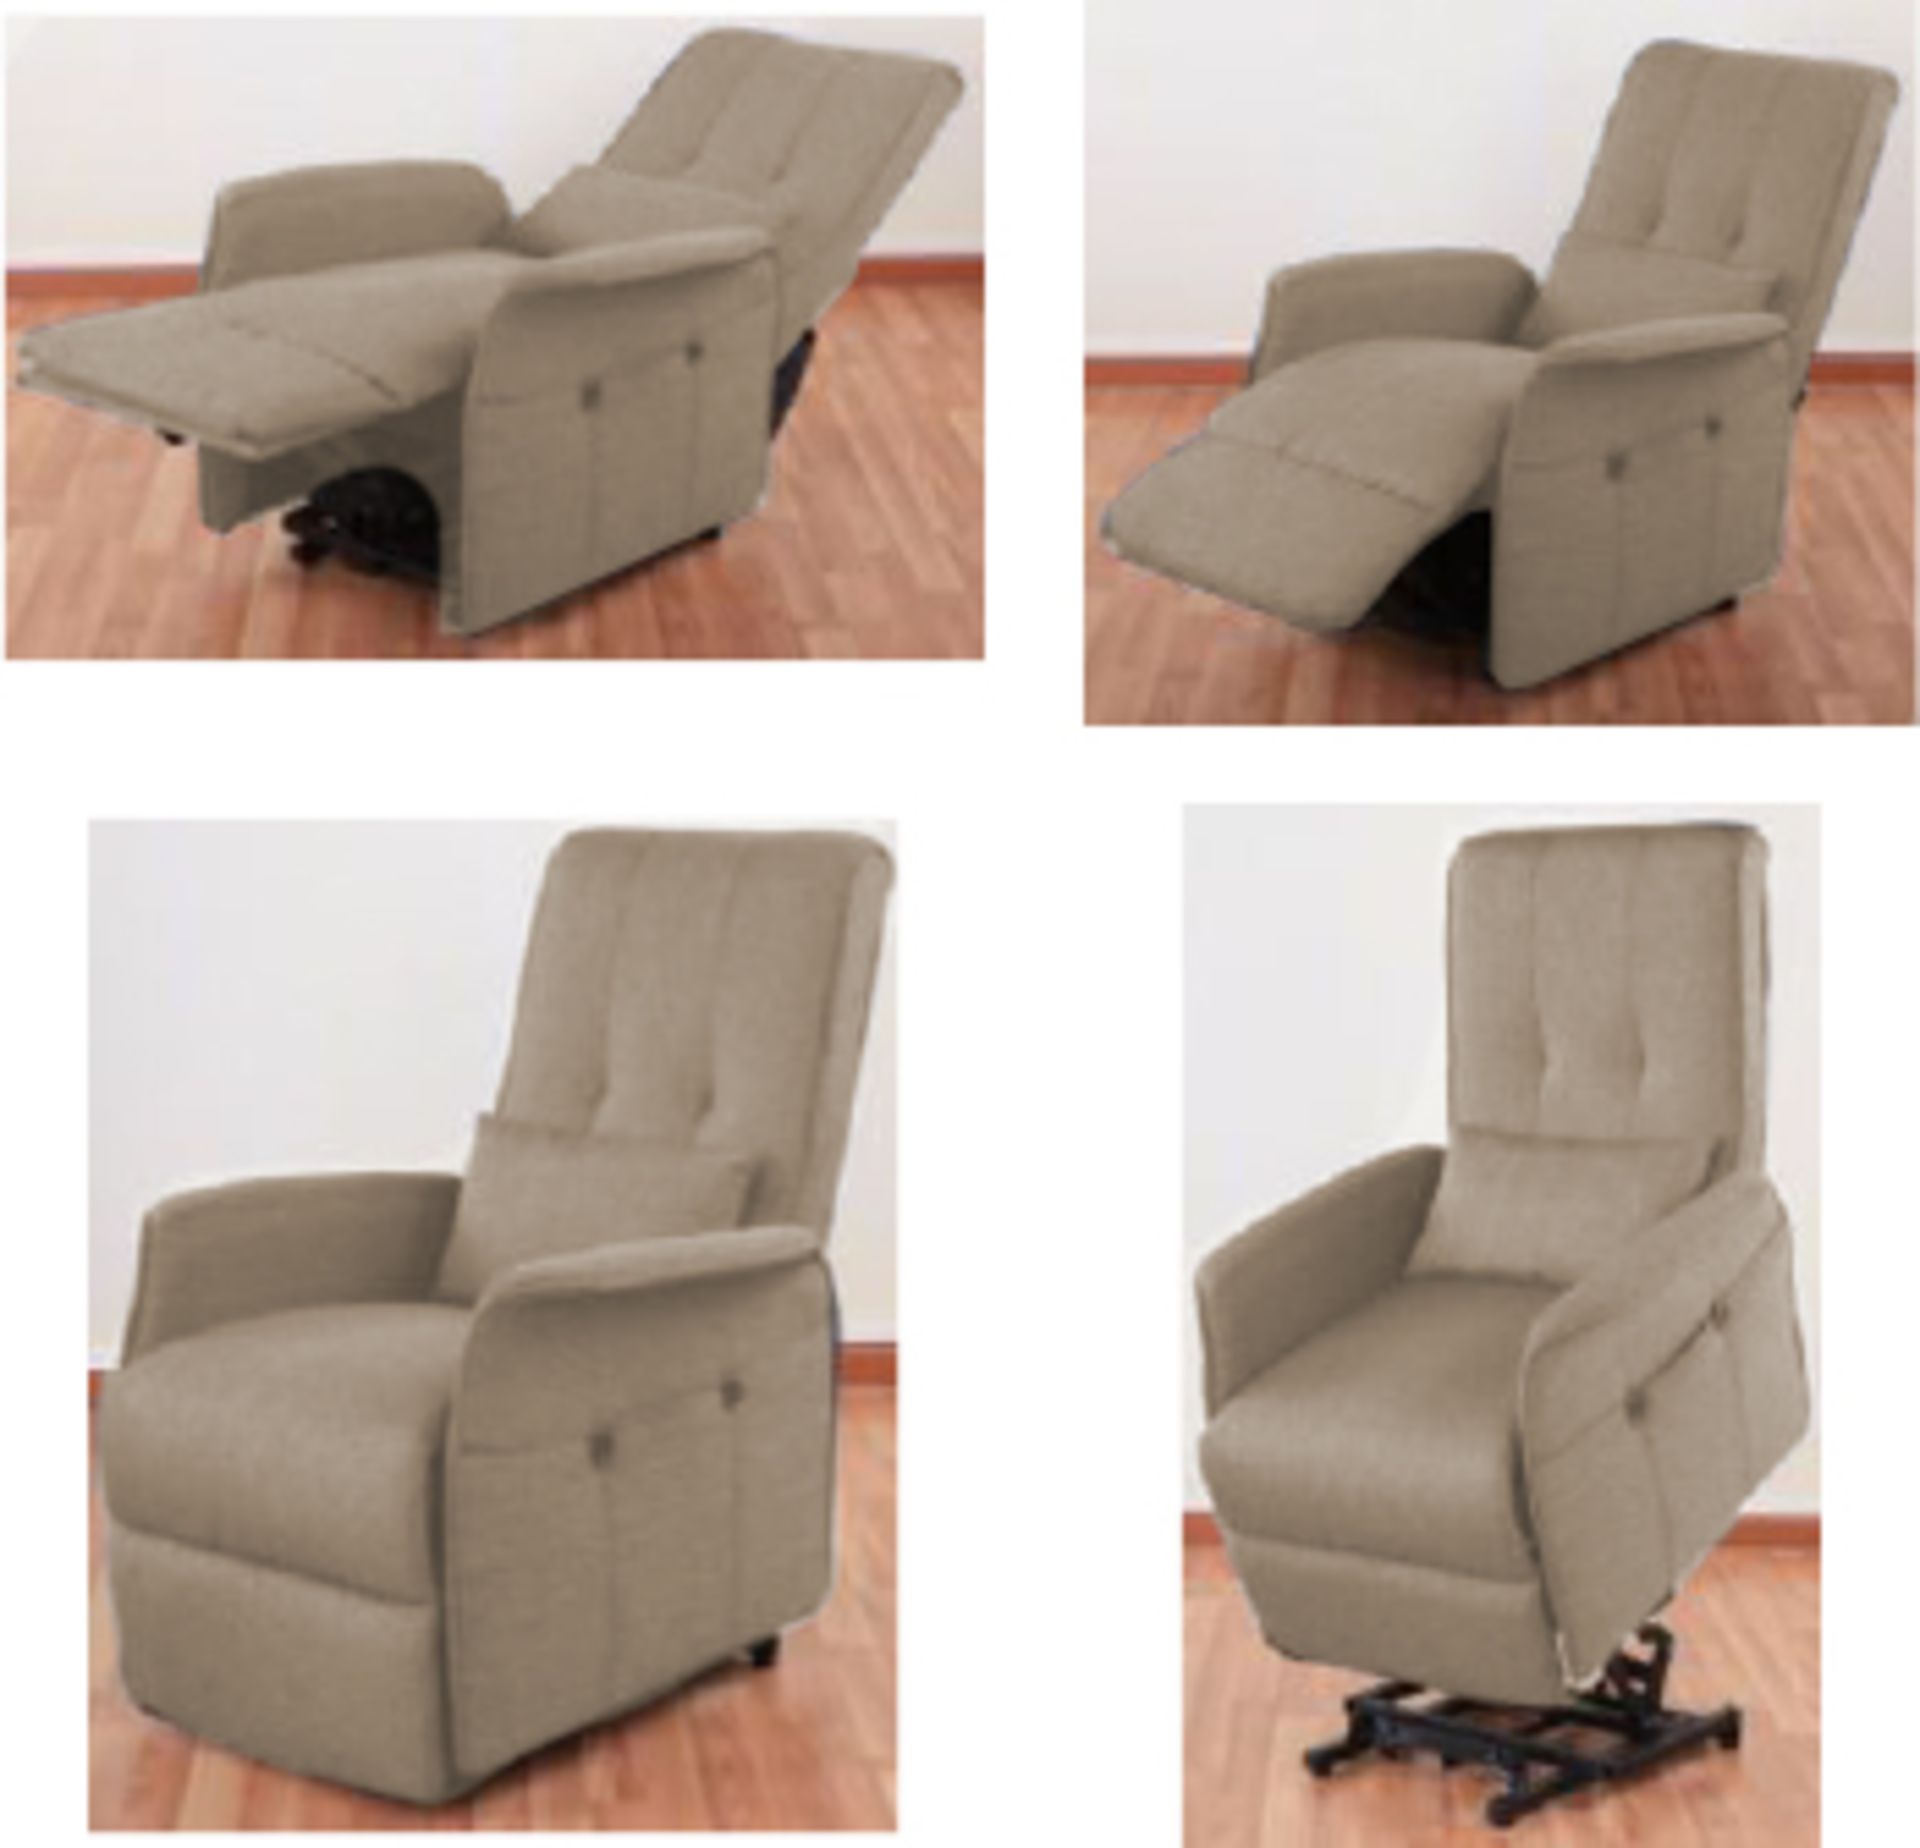 V  Grade A Brown Velour Rise & Recline Electric Chair With Remote Control - Brand New In Box RRP £